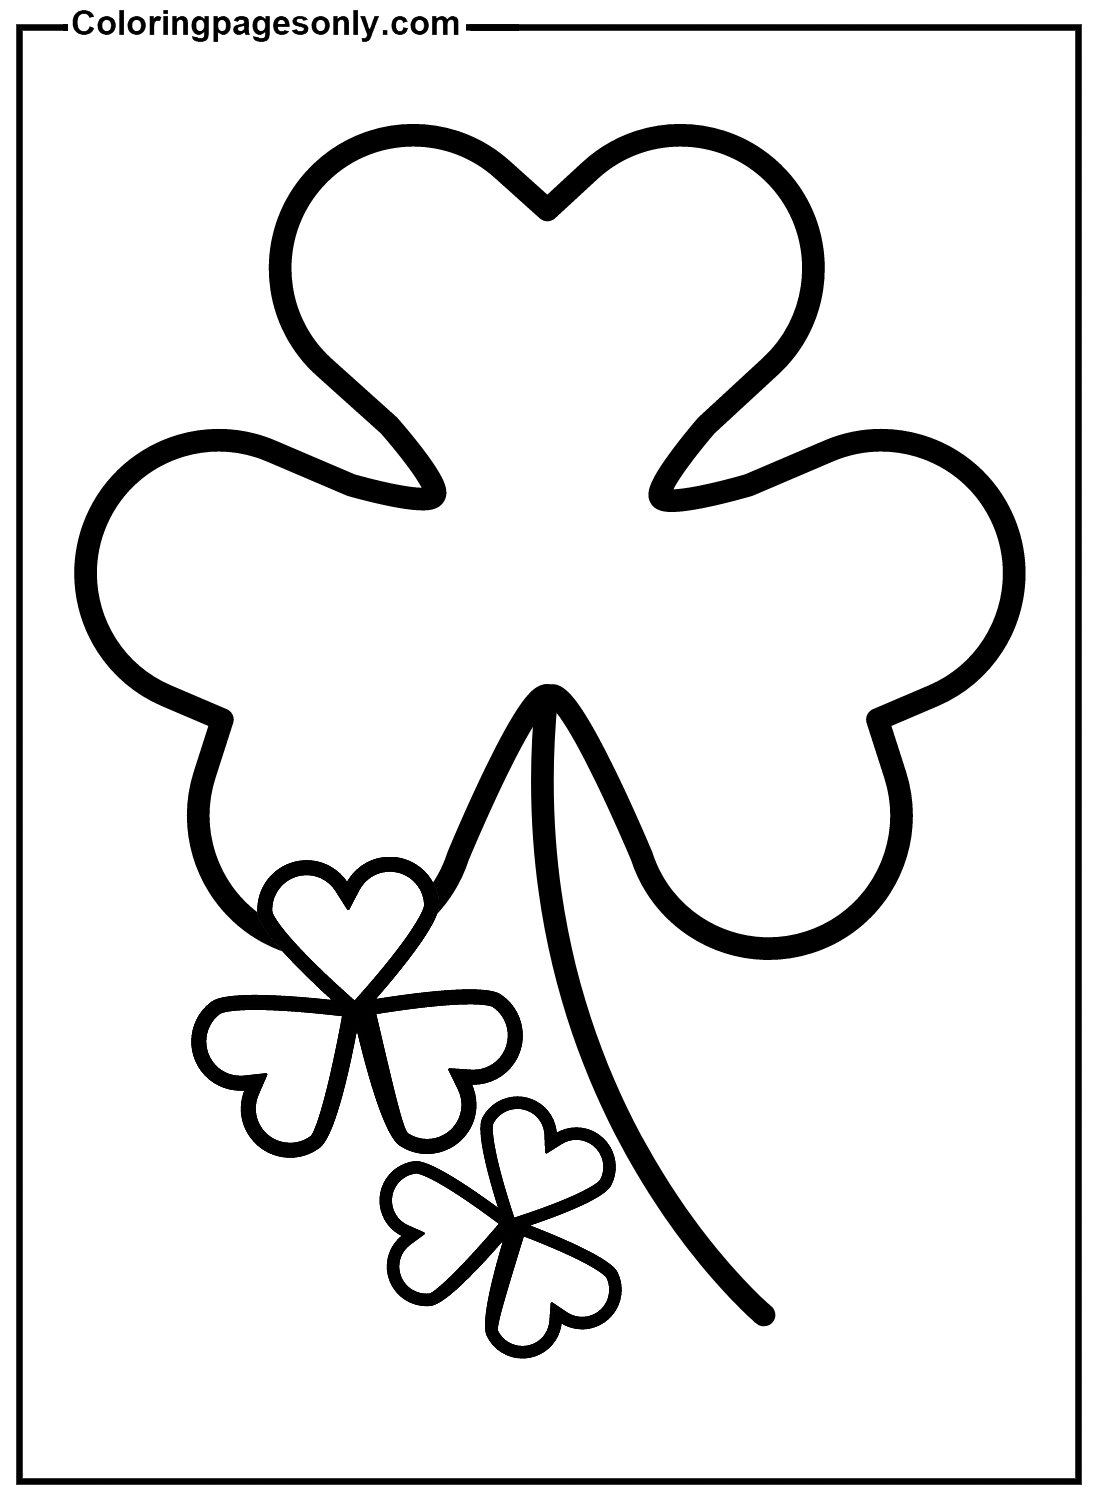 Free Shamrock Coloring Pages